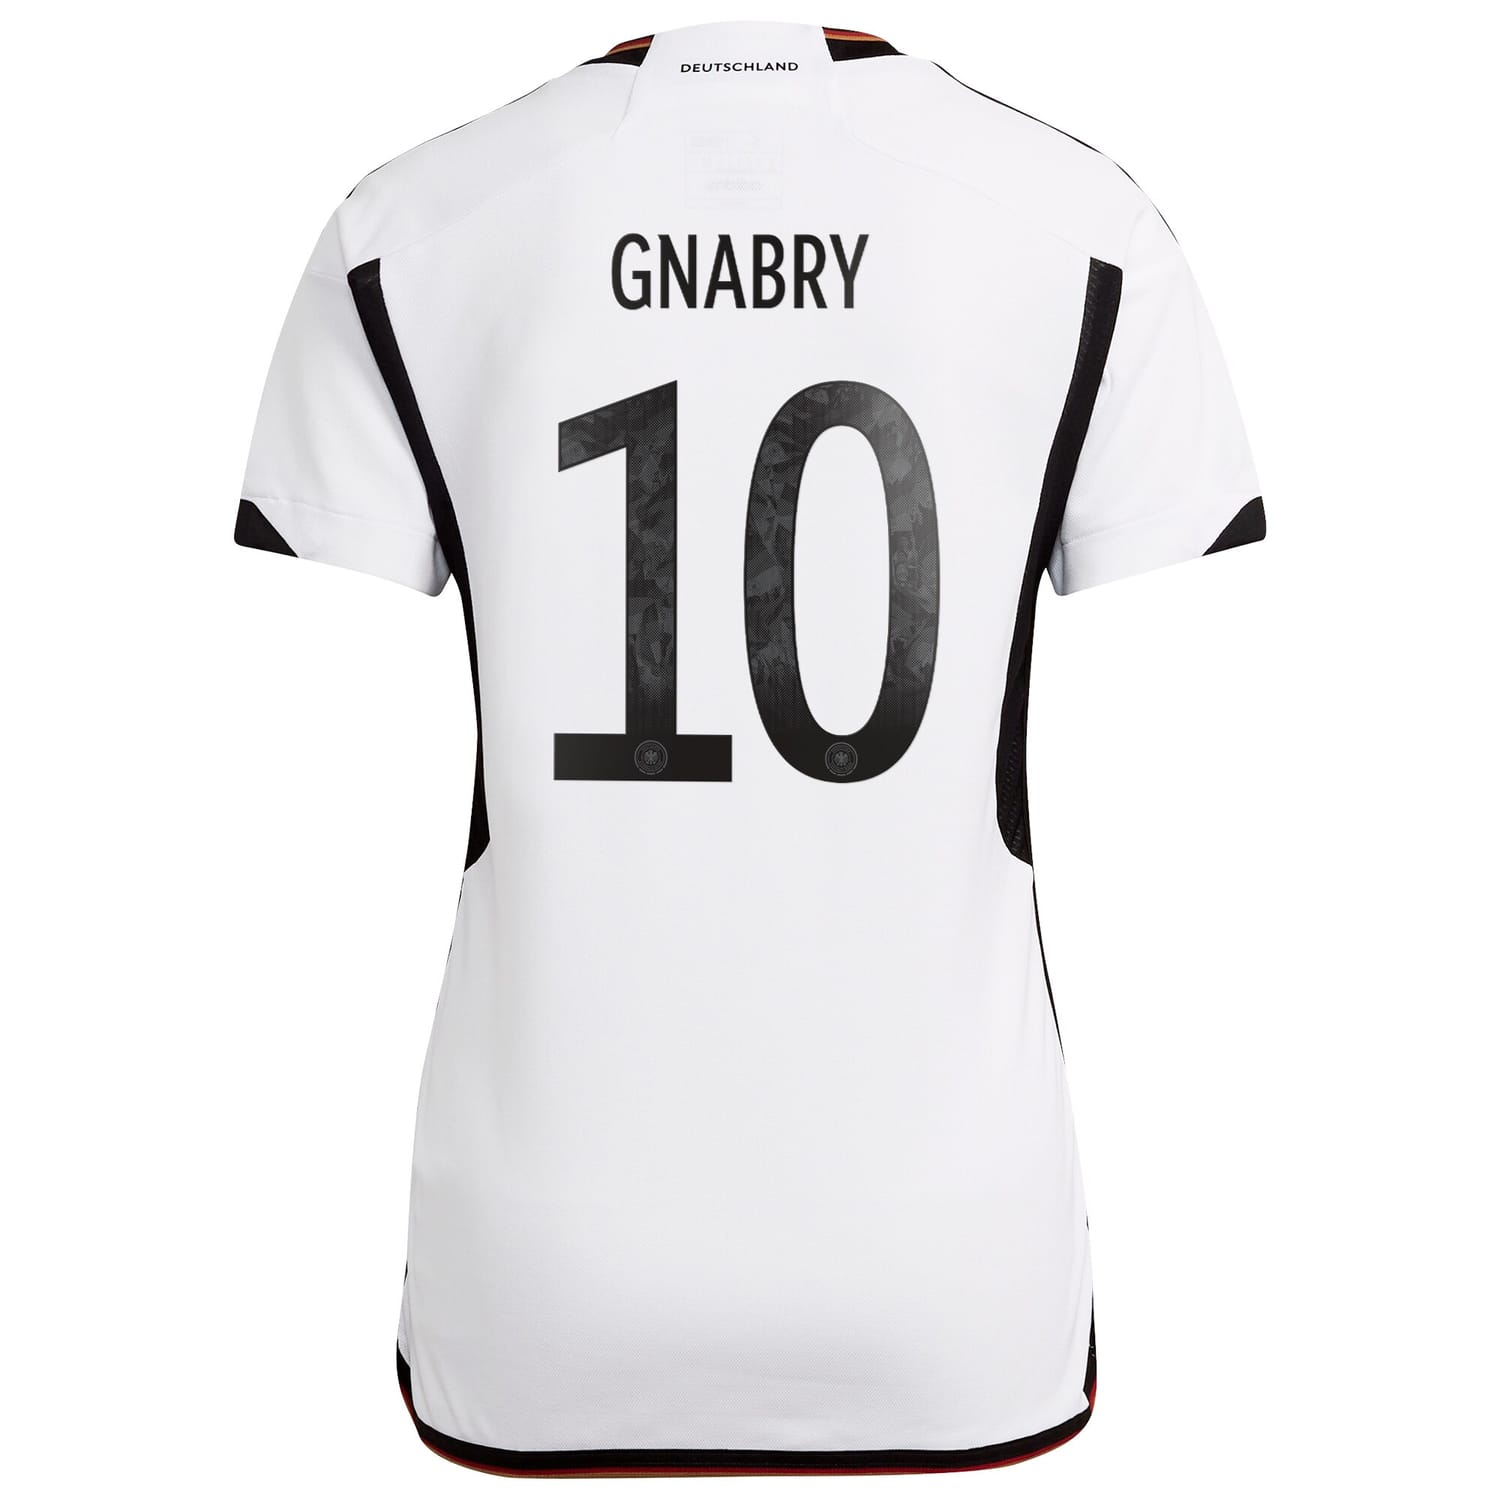 Germany National Team Home Jersey Shirt player Serge Gnabry 10